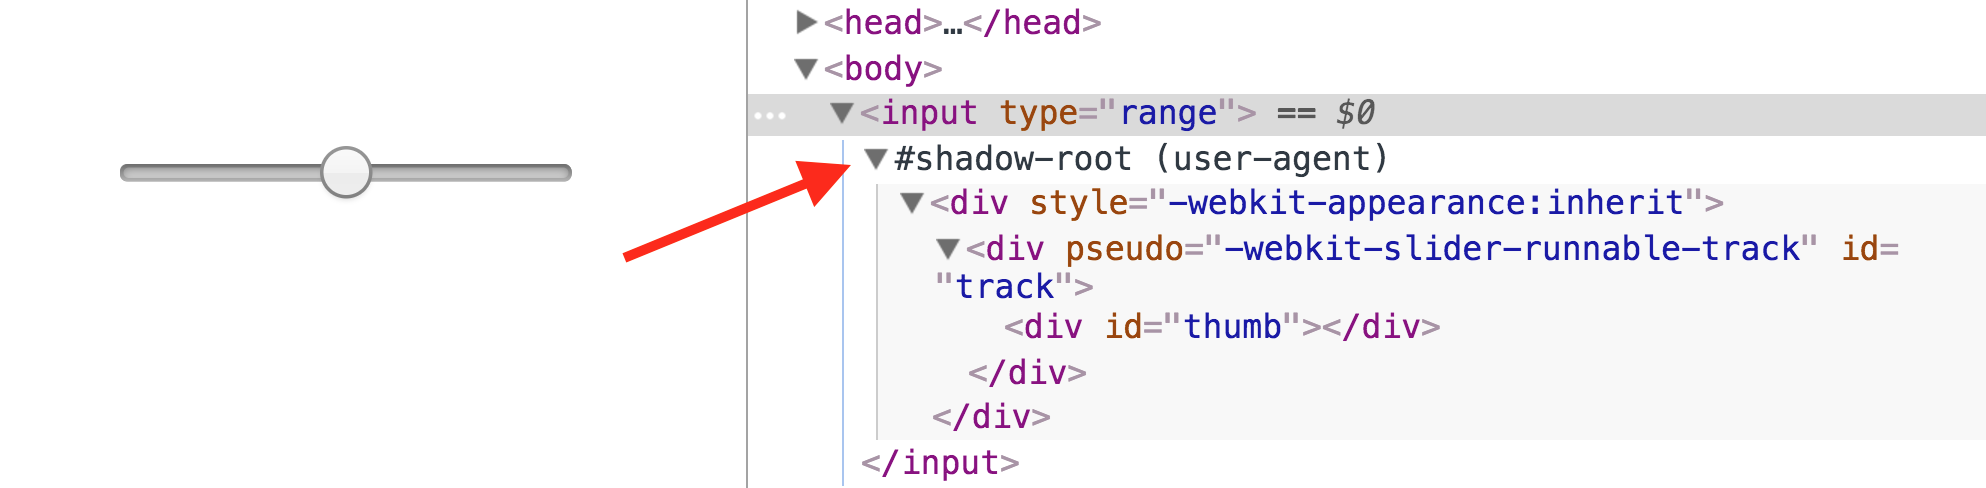 Chrome devtools showing the shadow root for an input range element